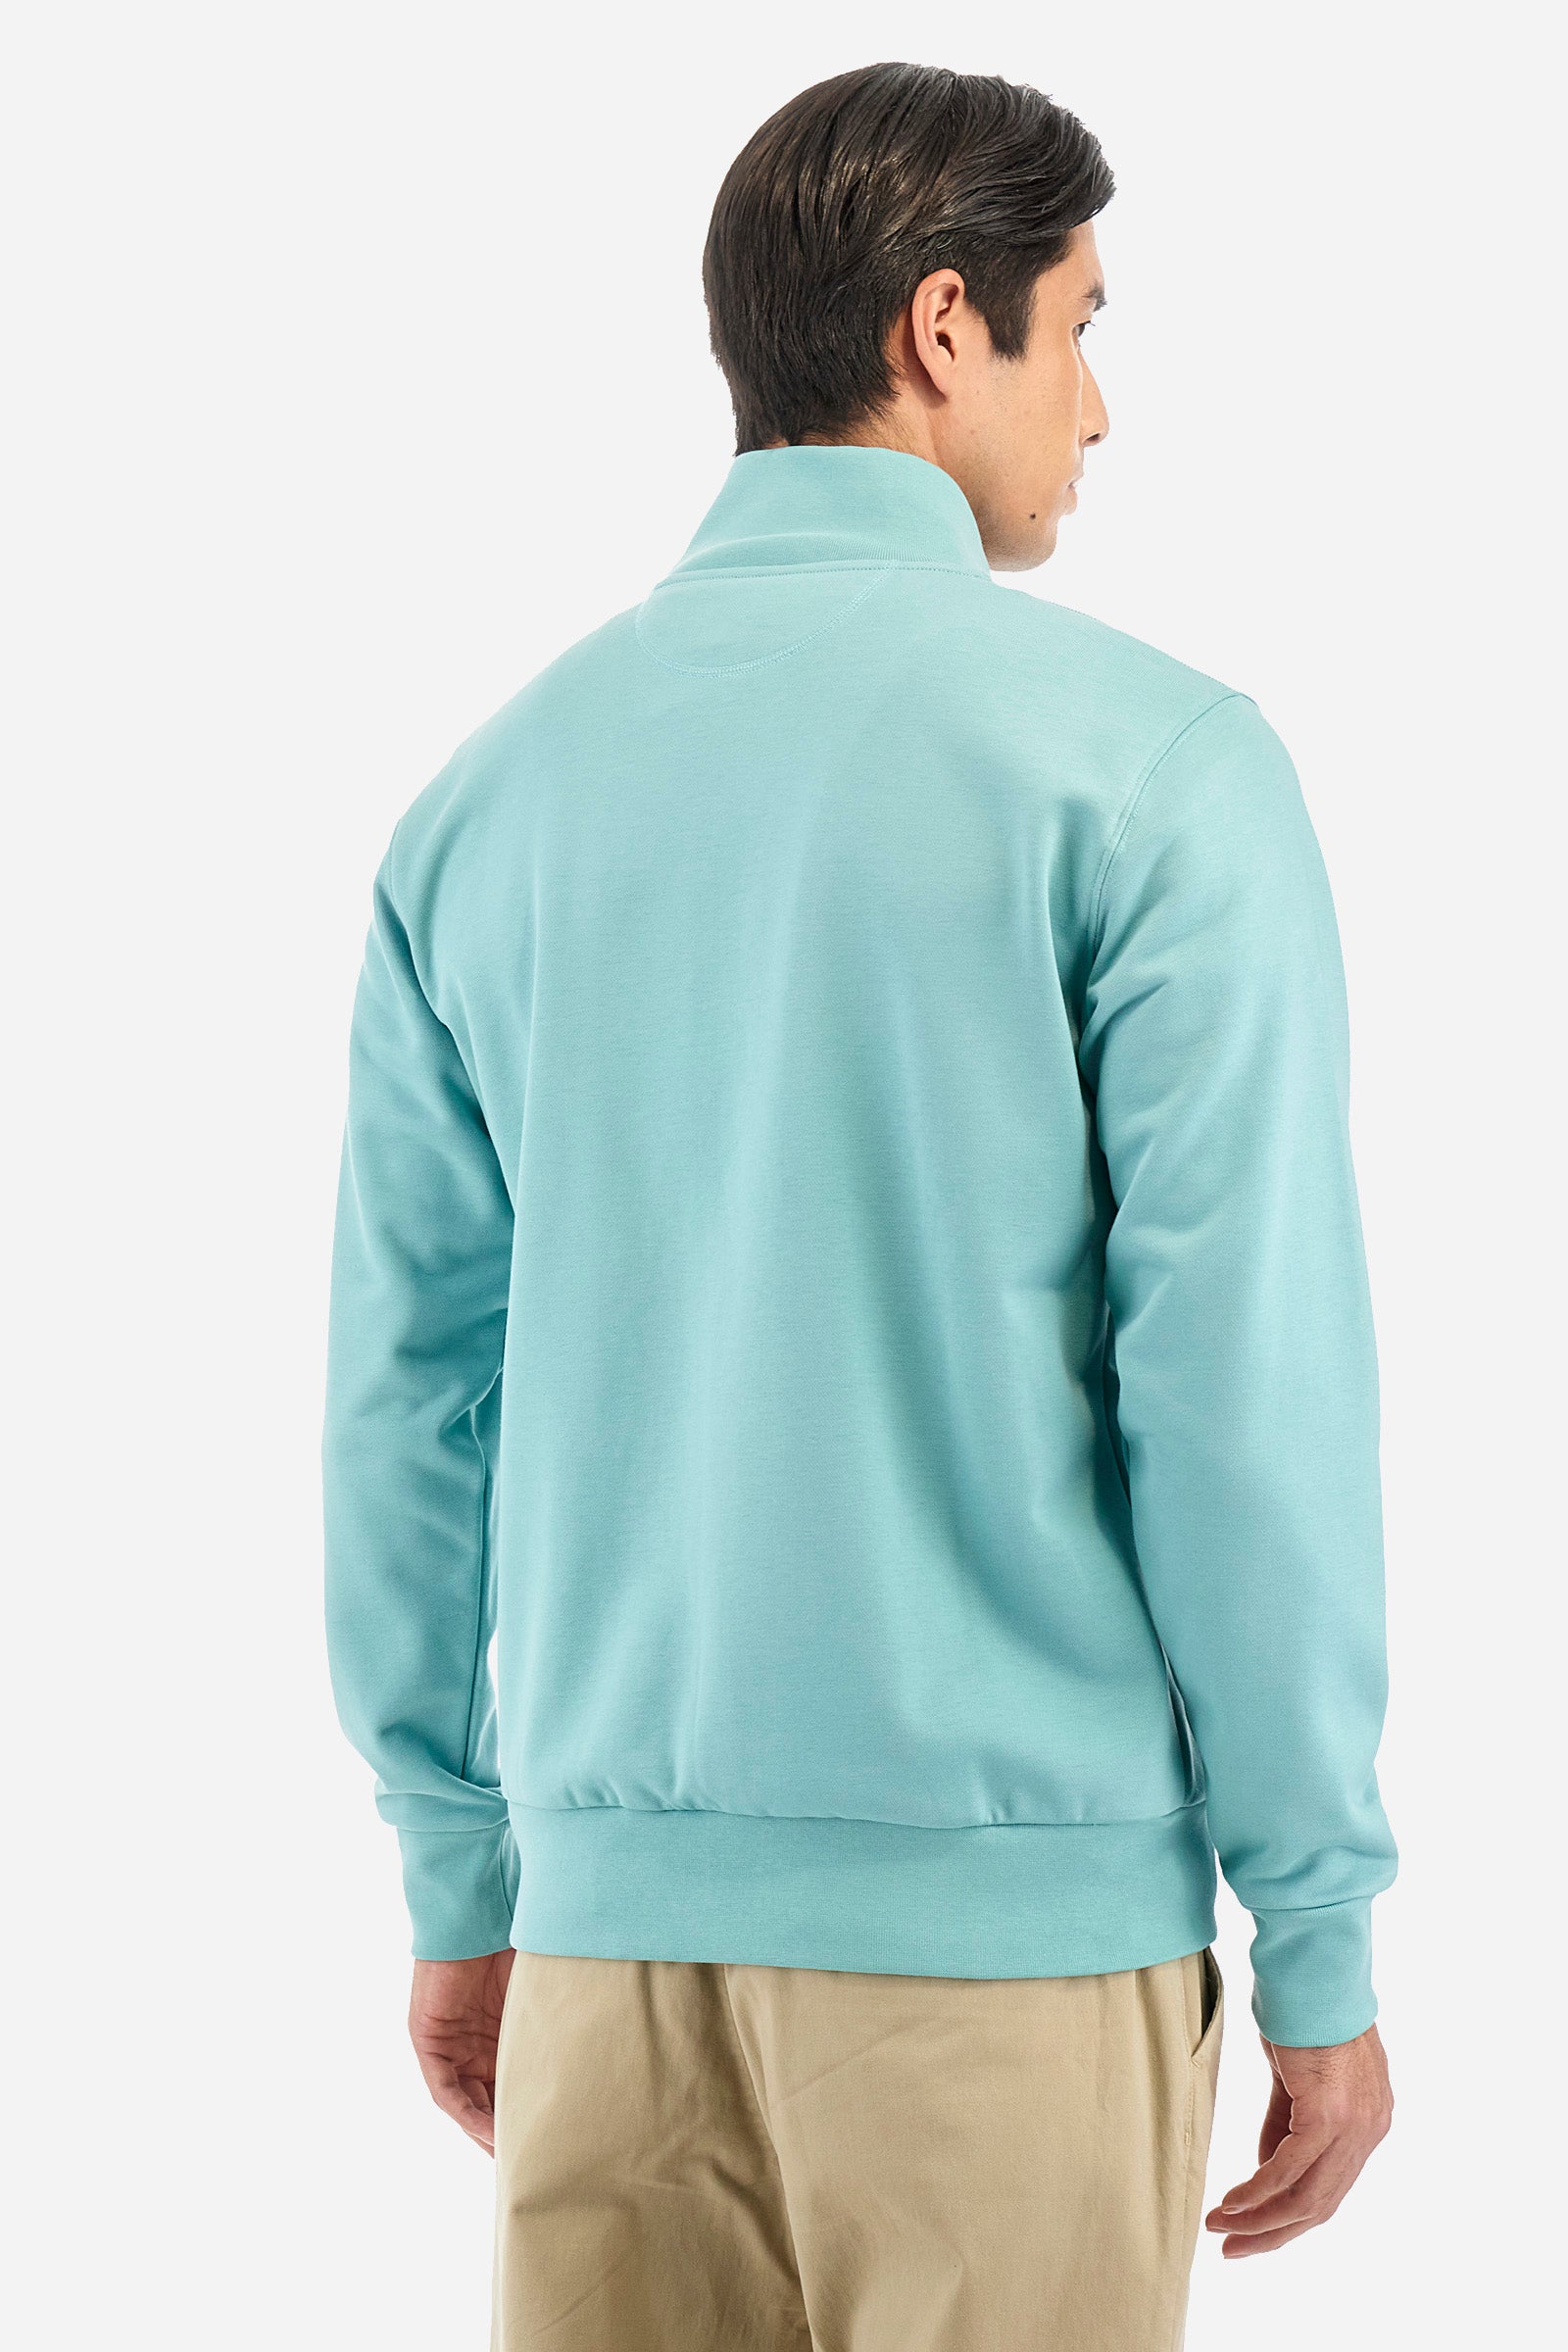 Sweat-shirt homme coupe classique - Yaacob